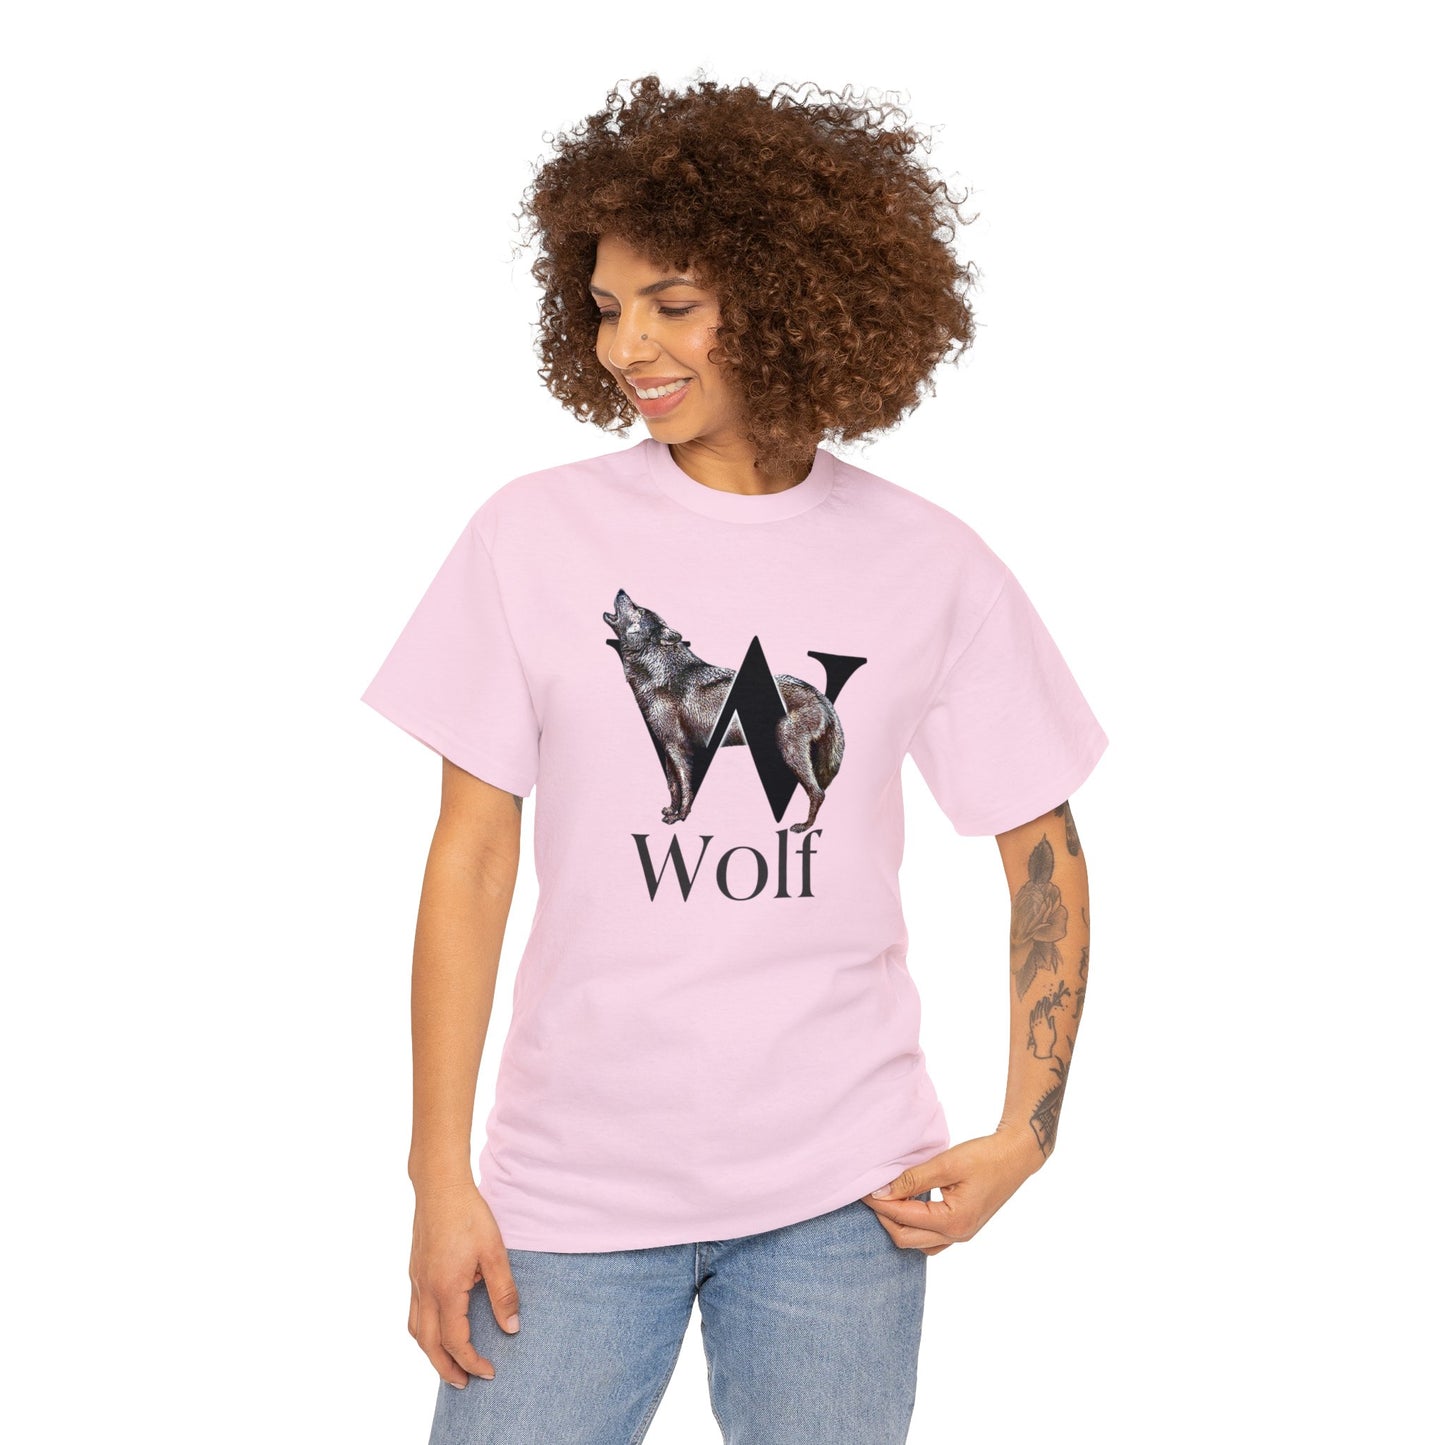 W is for Wolf t-shirt Wolf shirt, Wolf Drawing T-Shirt, wolf illustration, wolf animal t-shirt,